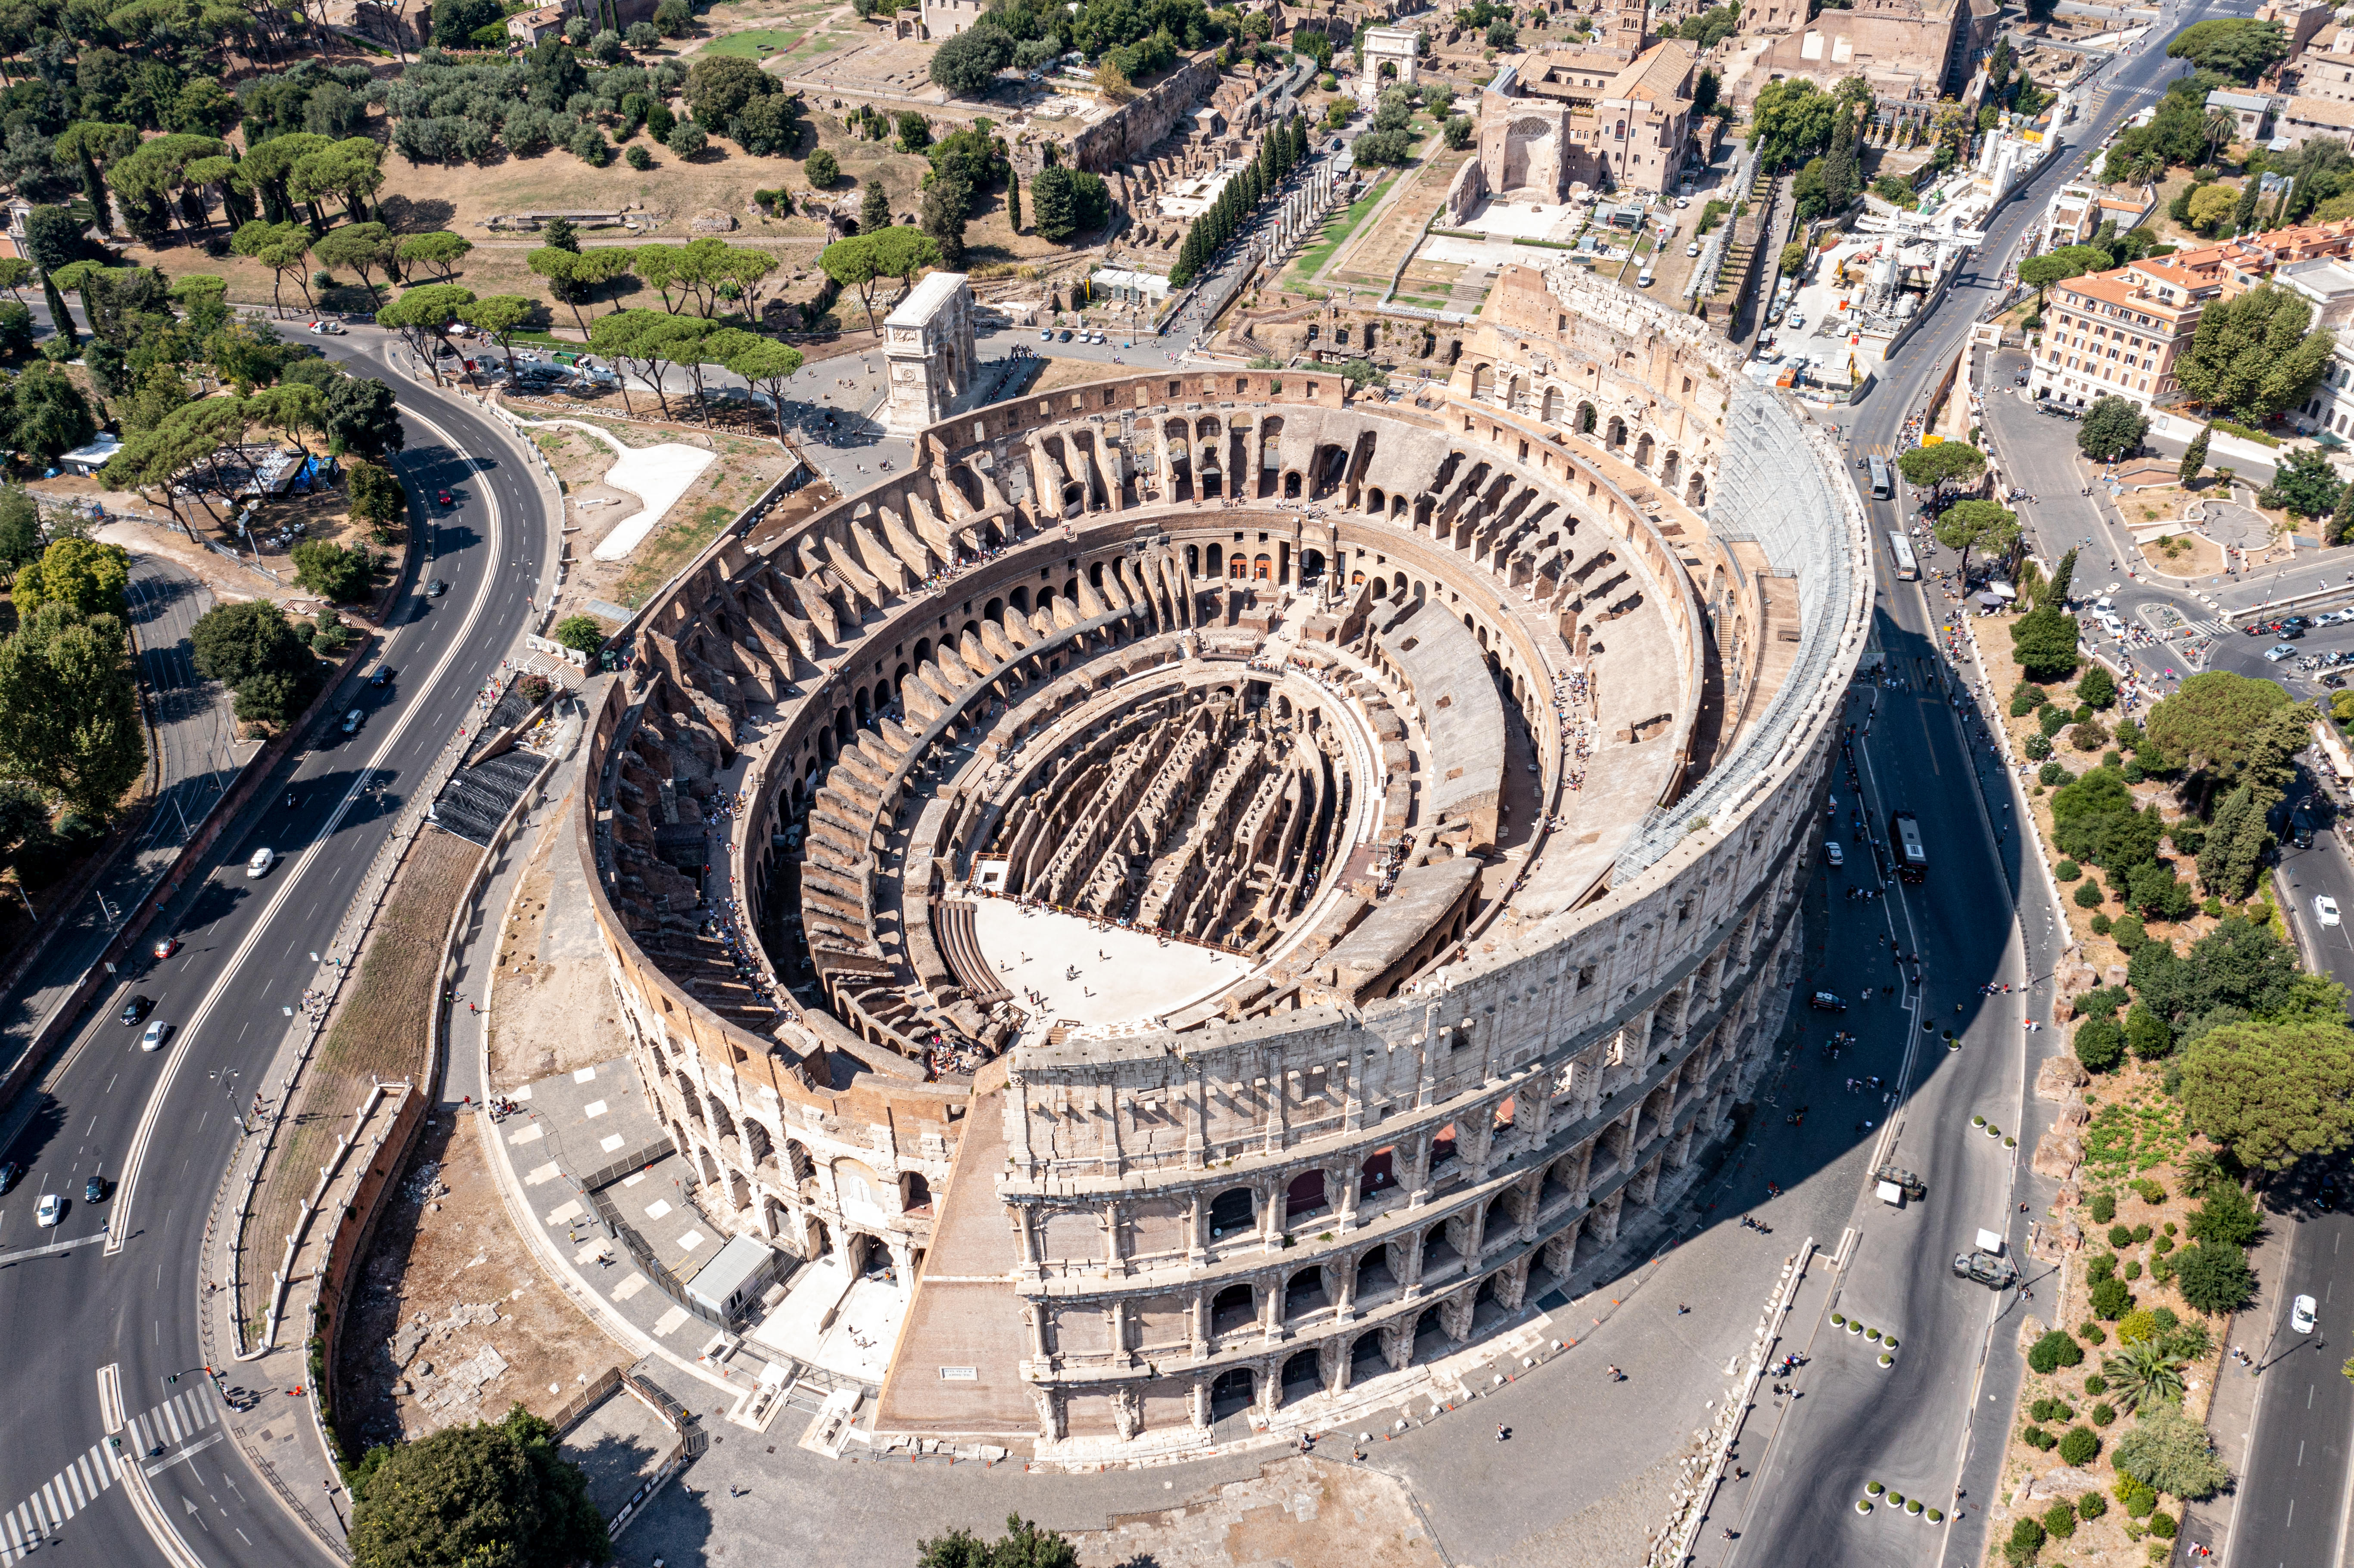 360 view of Colosseum